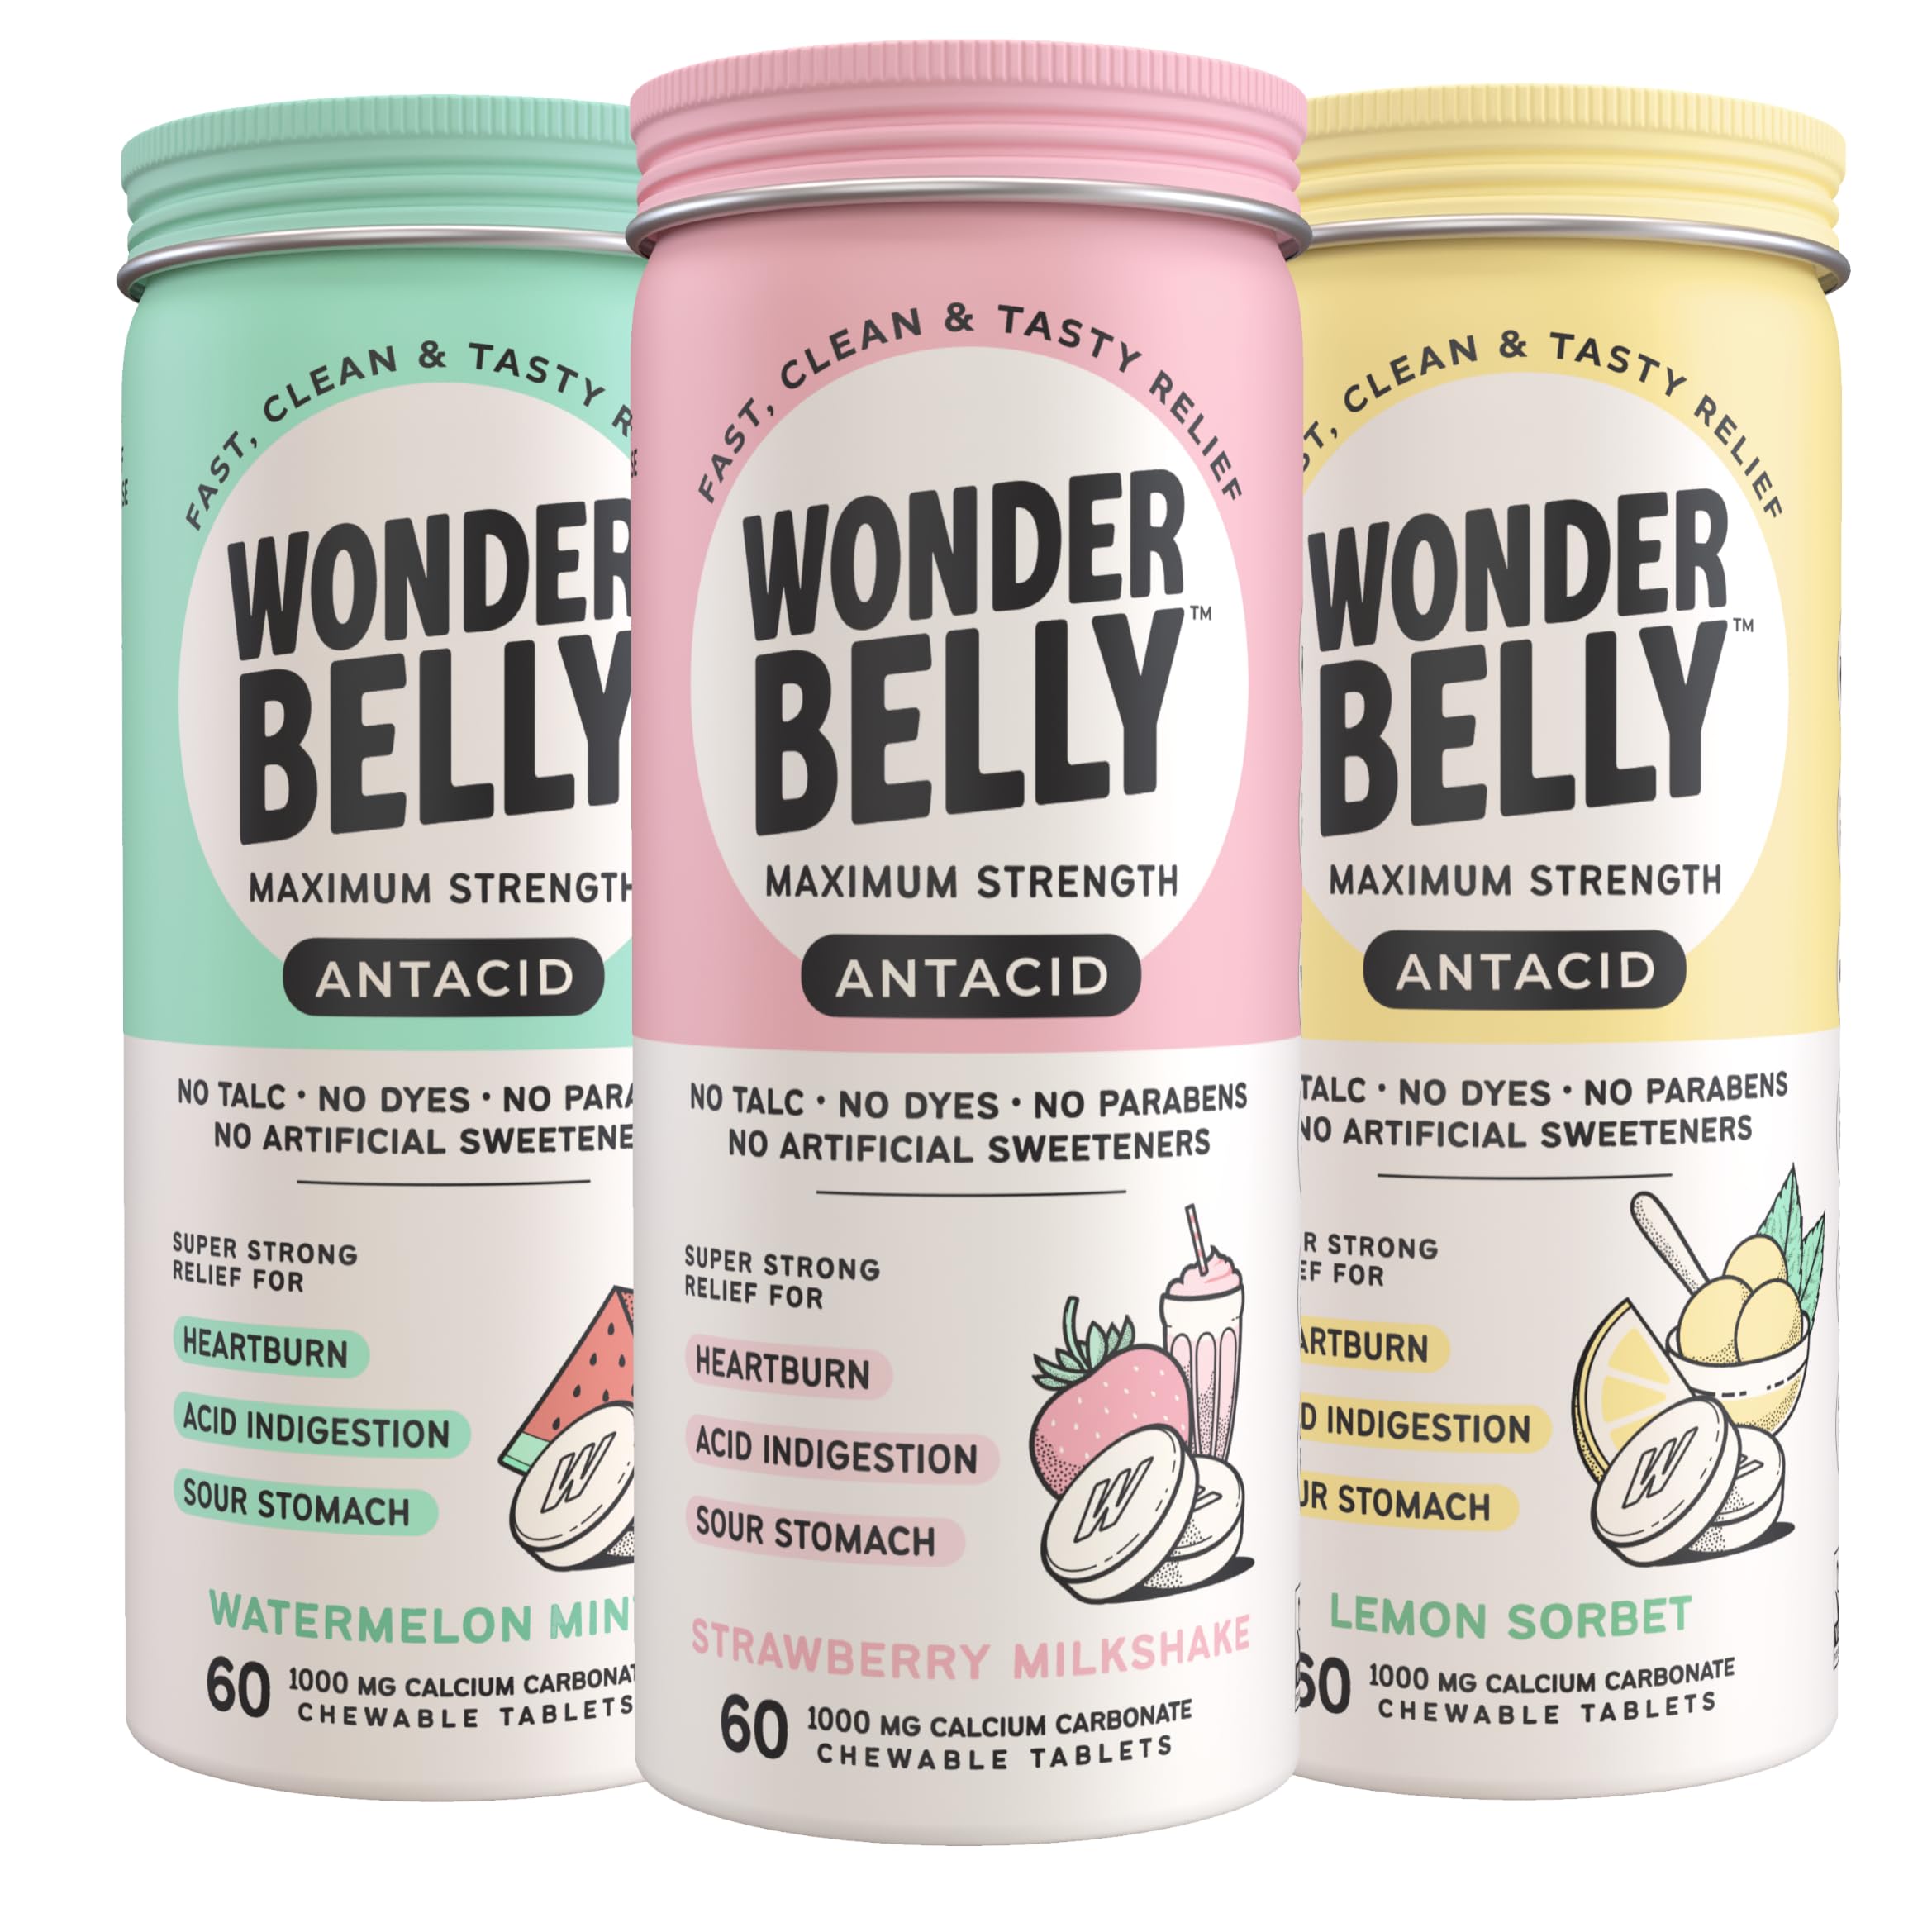 Wonderbelly Maximum Strength Antacid Chewable Tablets, 1000mg Calcium Carbonate, Instant Heartburn and Acid Indigestion Relief, 